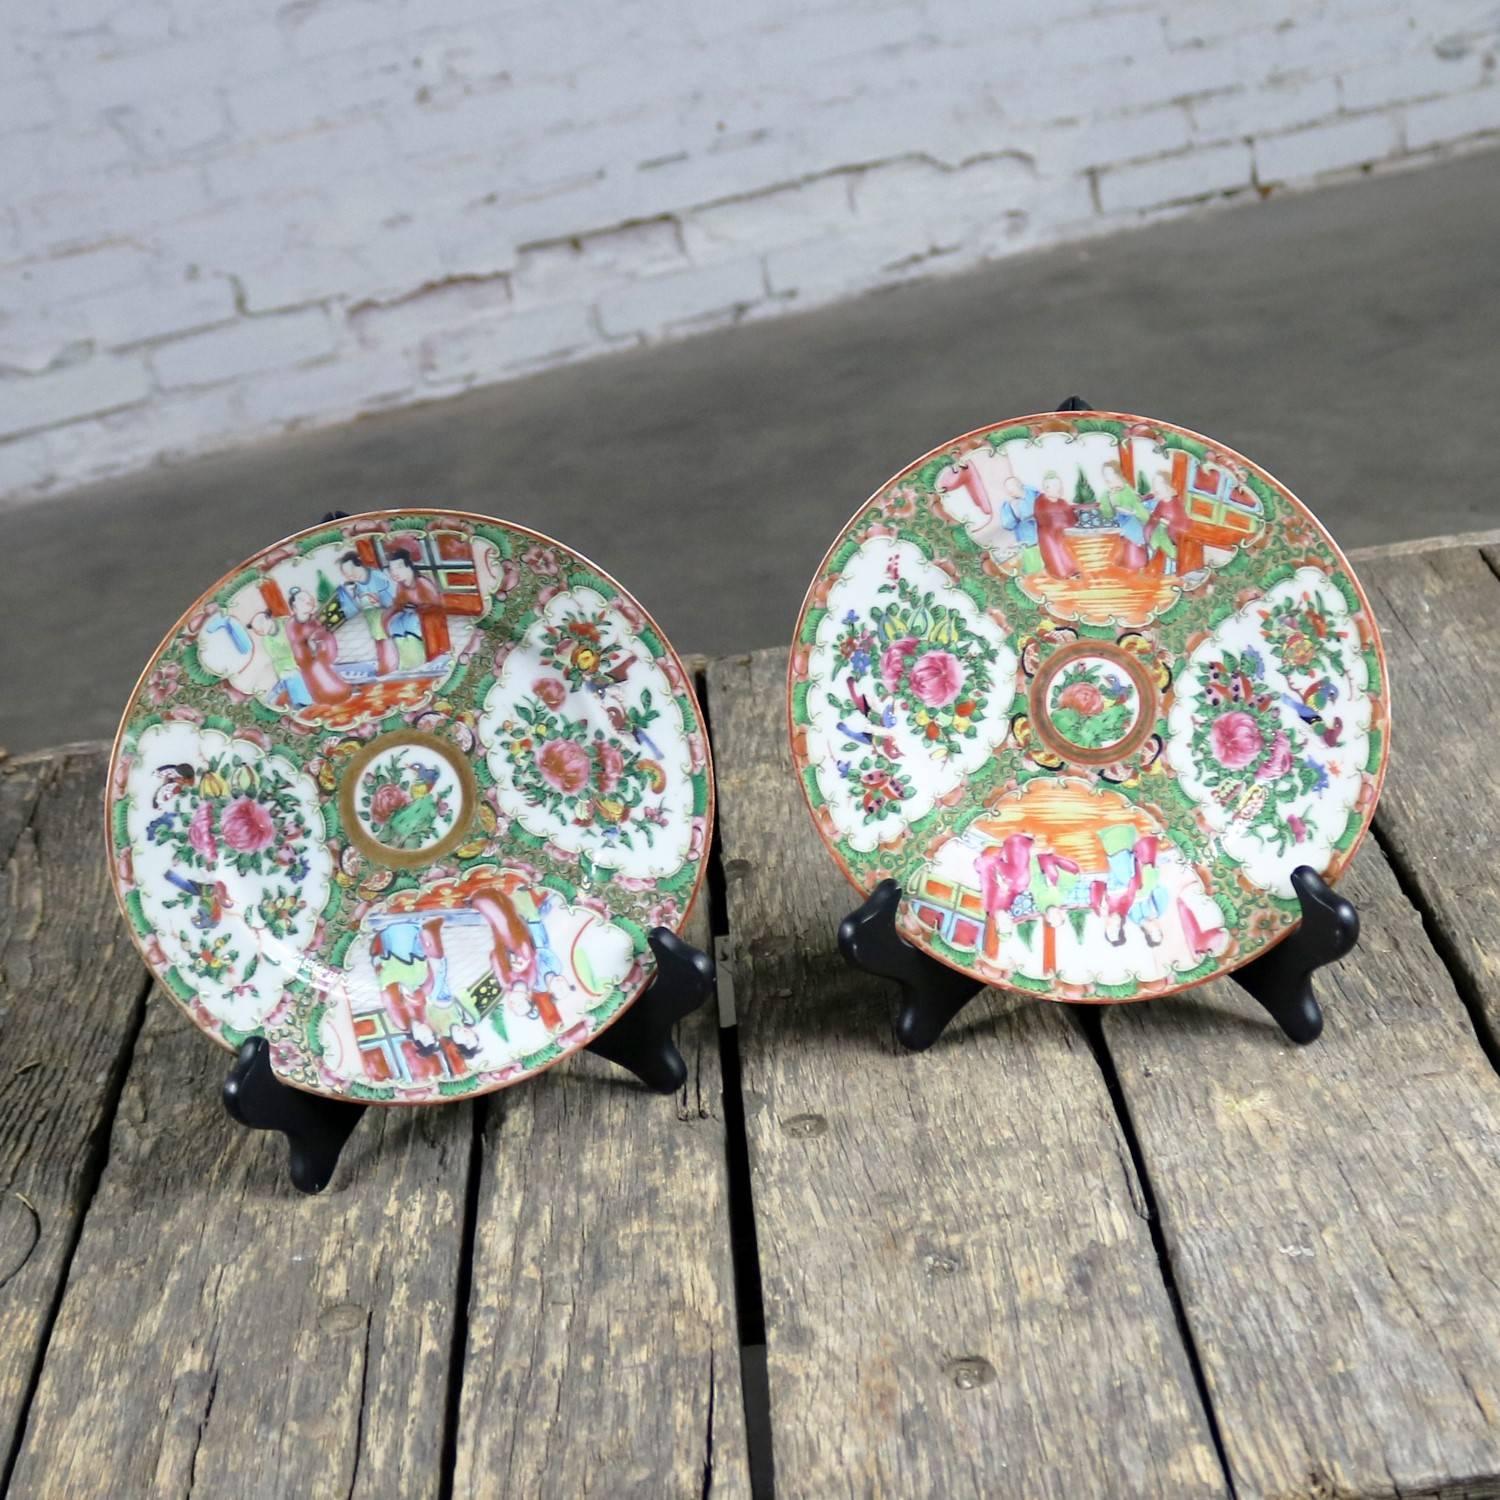 Wonderful set of two antique Chinese Rose Medallion porcelain 8.5-inch plates with a traditional medallion design featuring village scenes and floral and bird panels. Each plate has slight differences in the design. Both plates are in fabulous